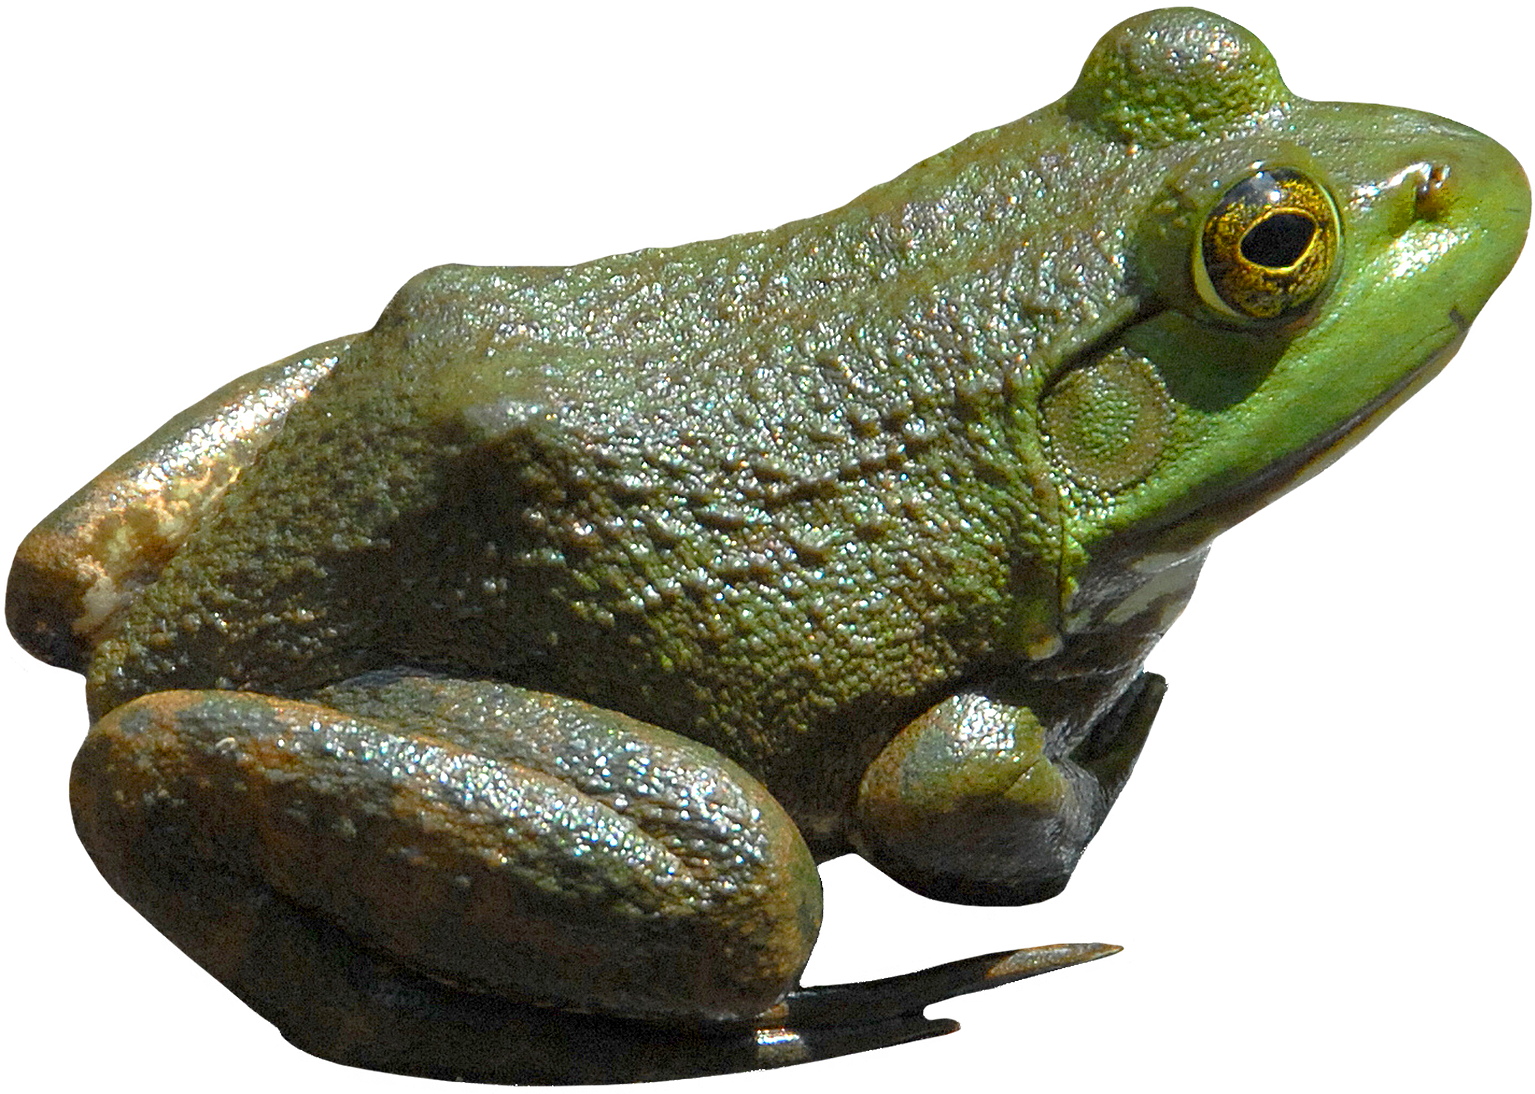 Frog PNG - 26658